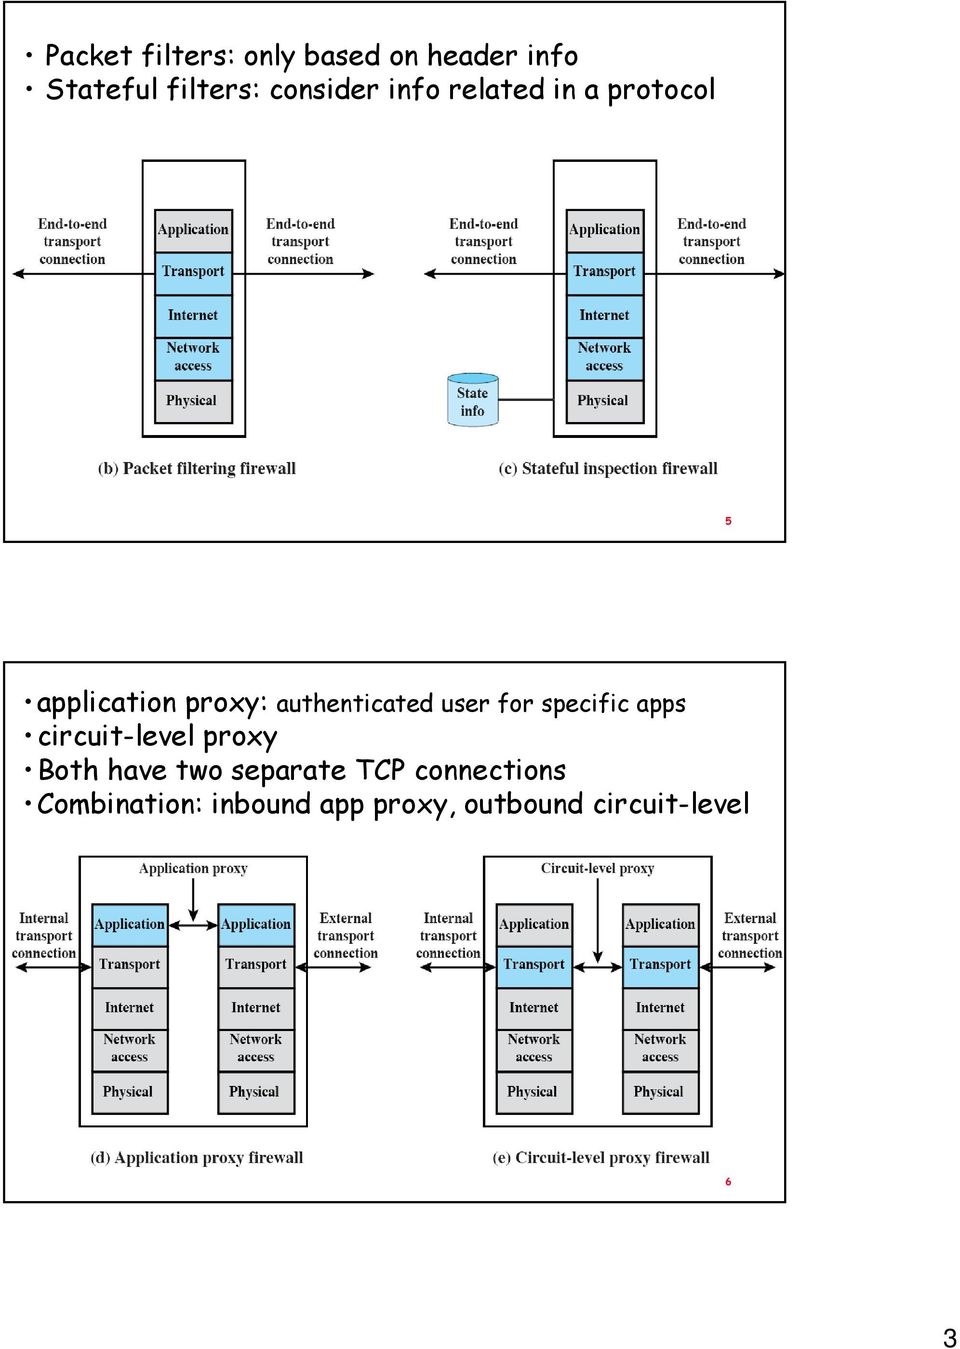 filtering application proxy: authenticated user for specific apps circuit-level proxy